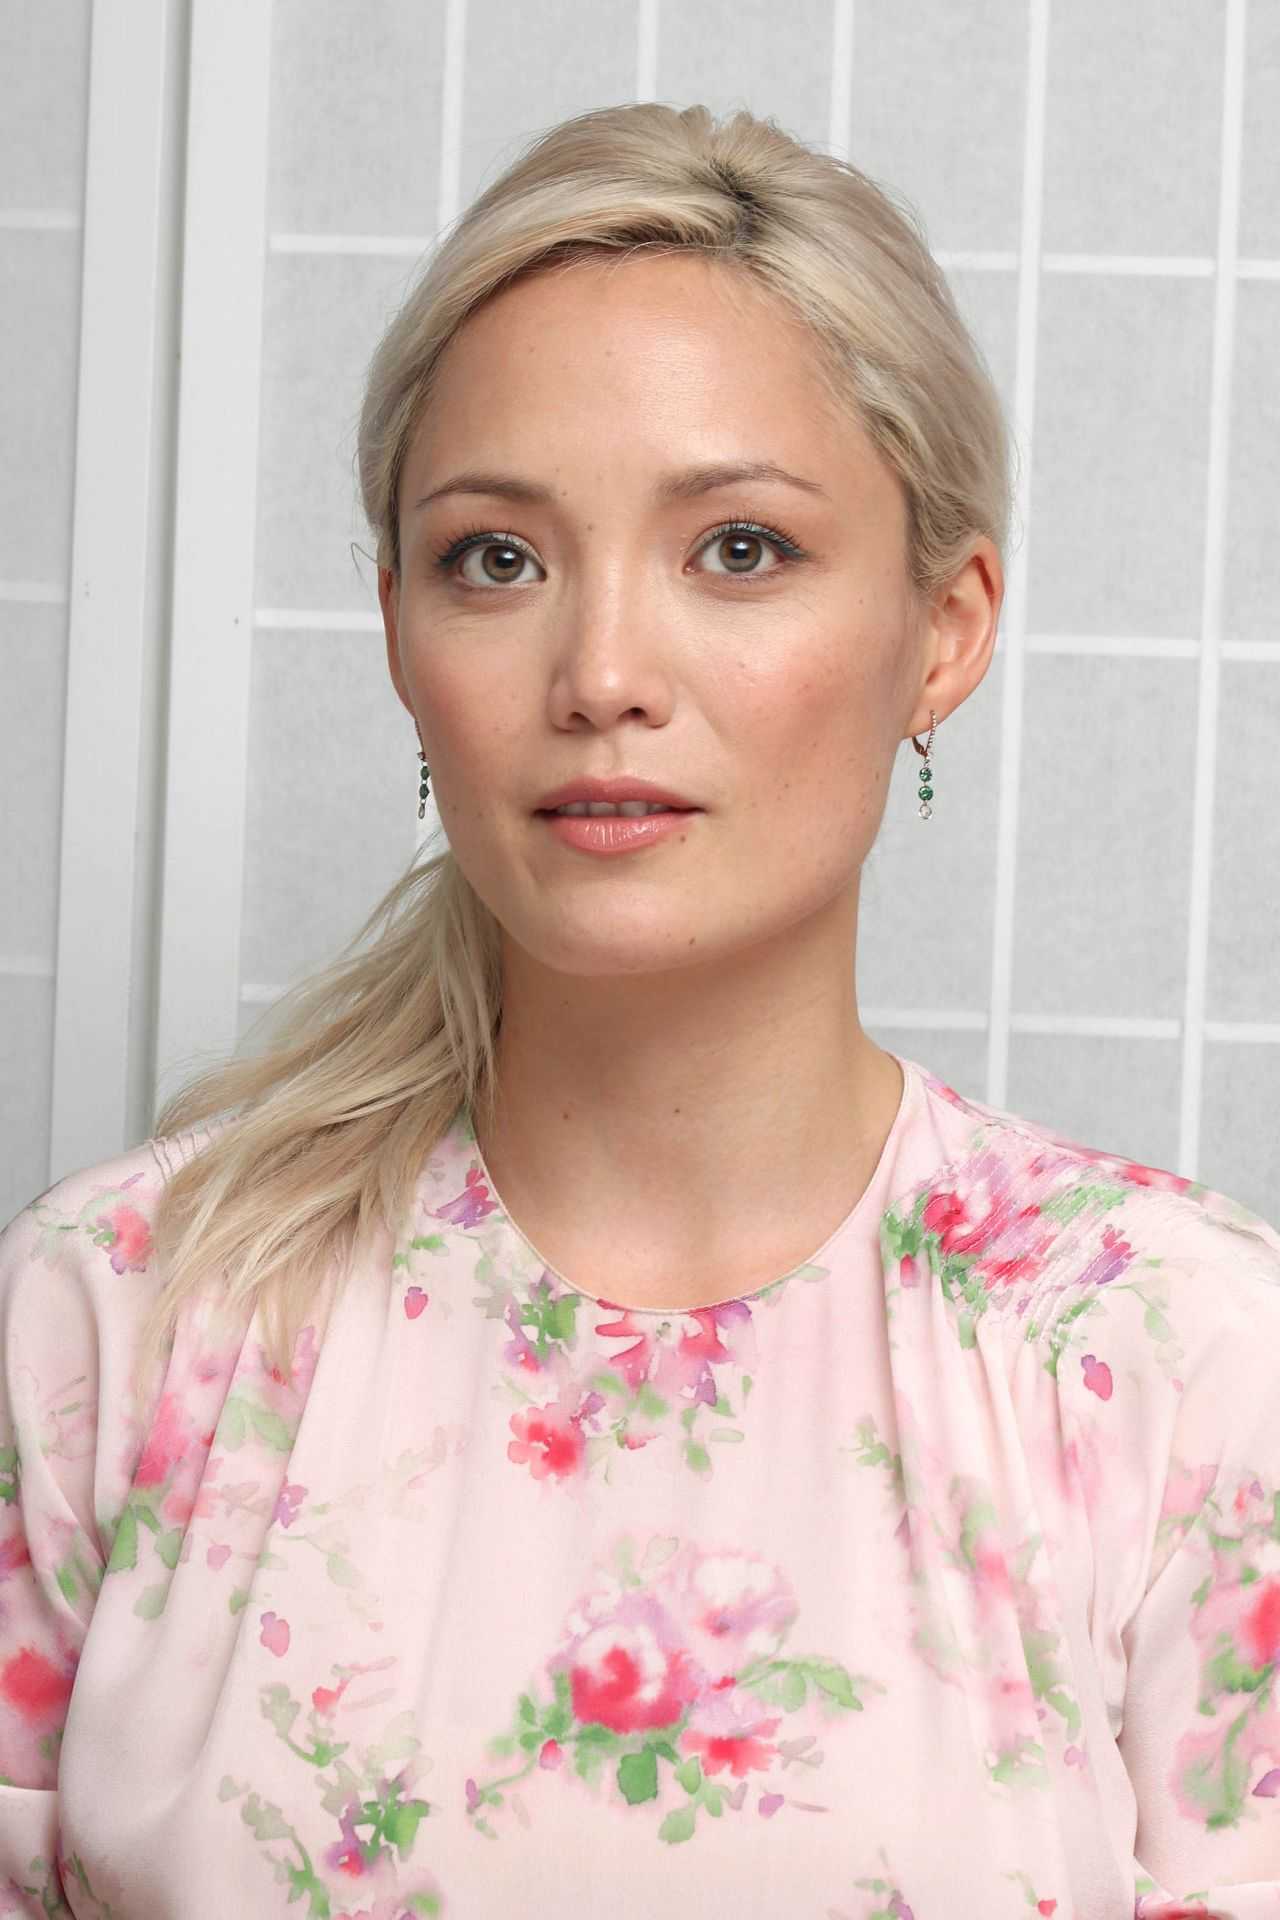 70+ Hot Pictures Of Pom Klementieff Who Plays Mantis In Marvel Cinematic Universe 223